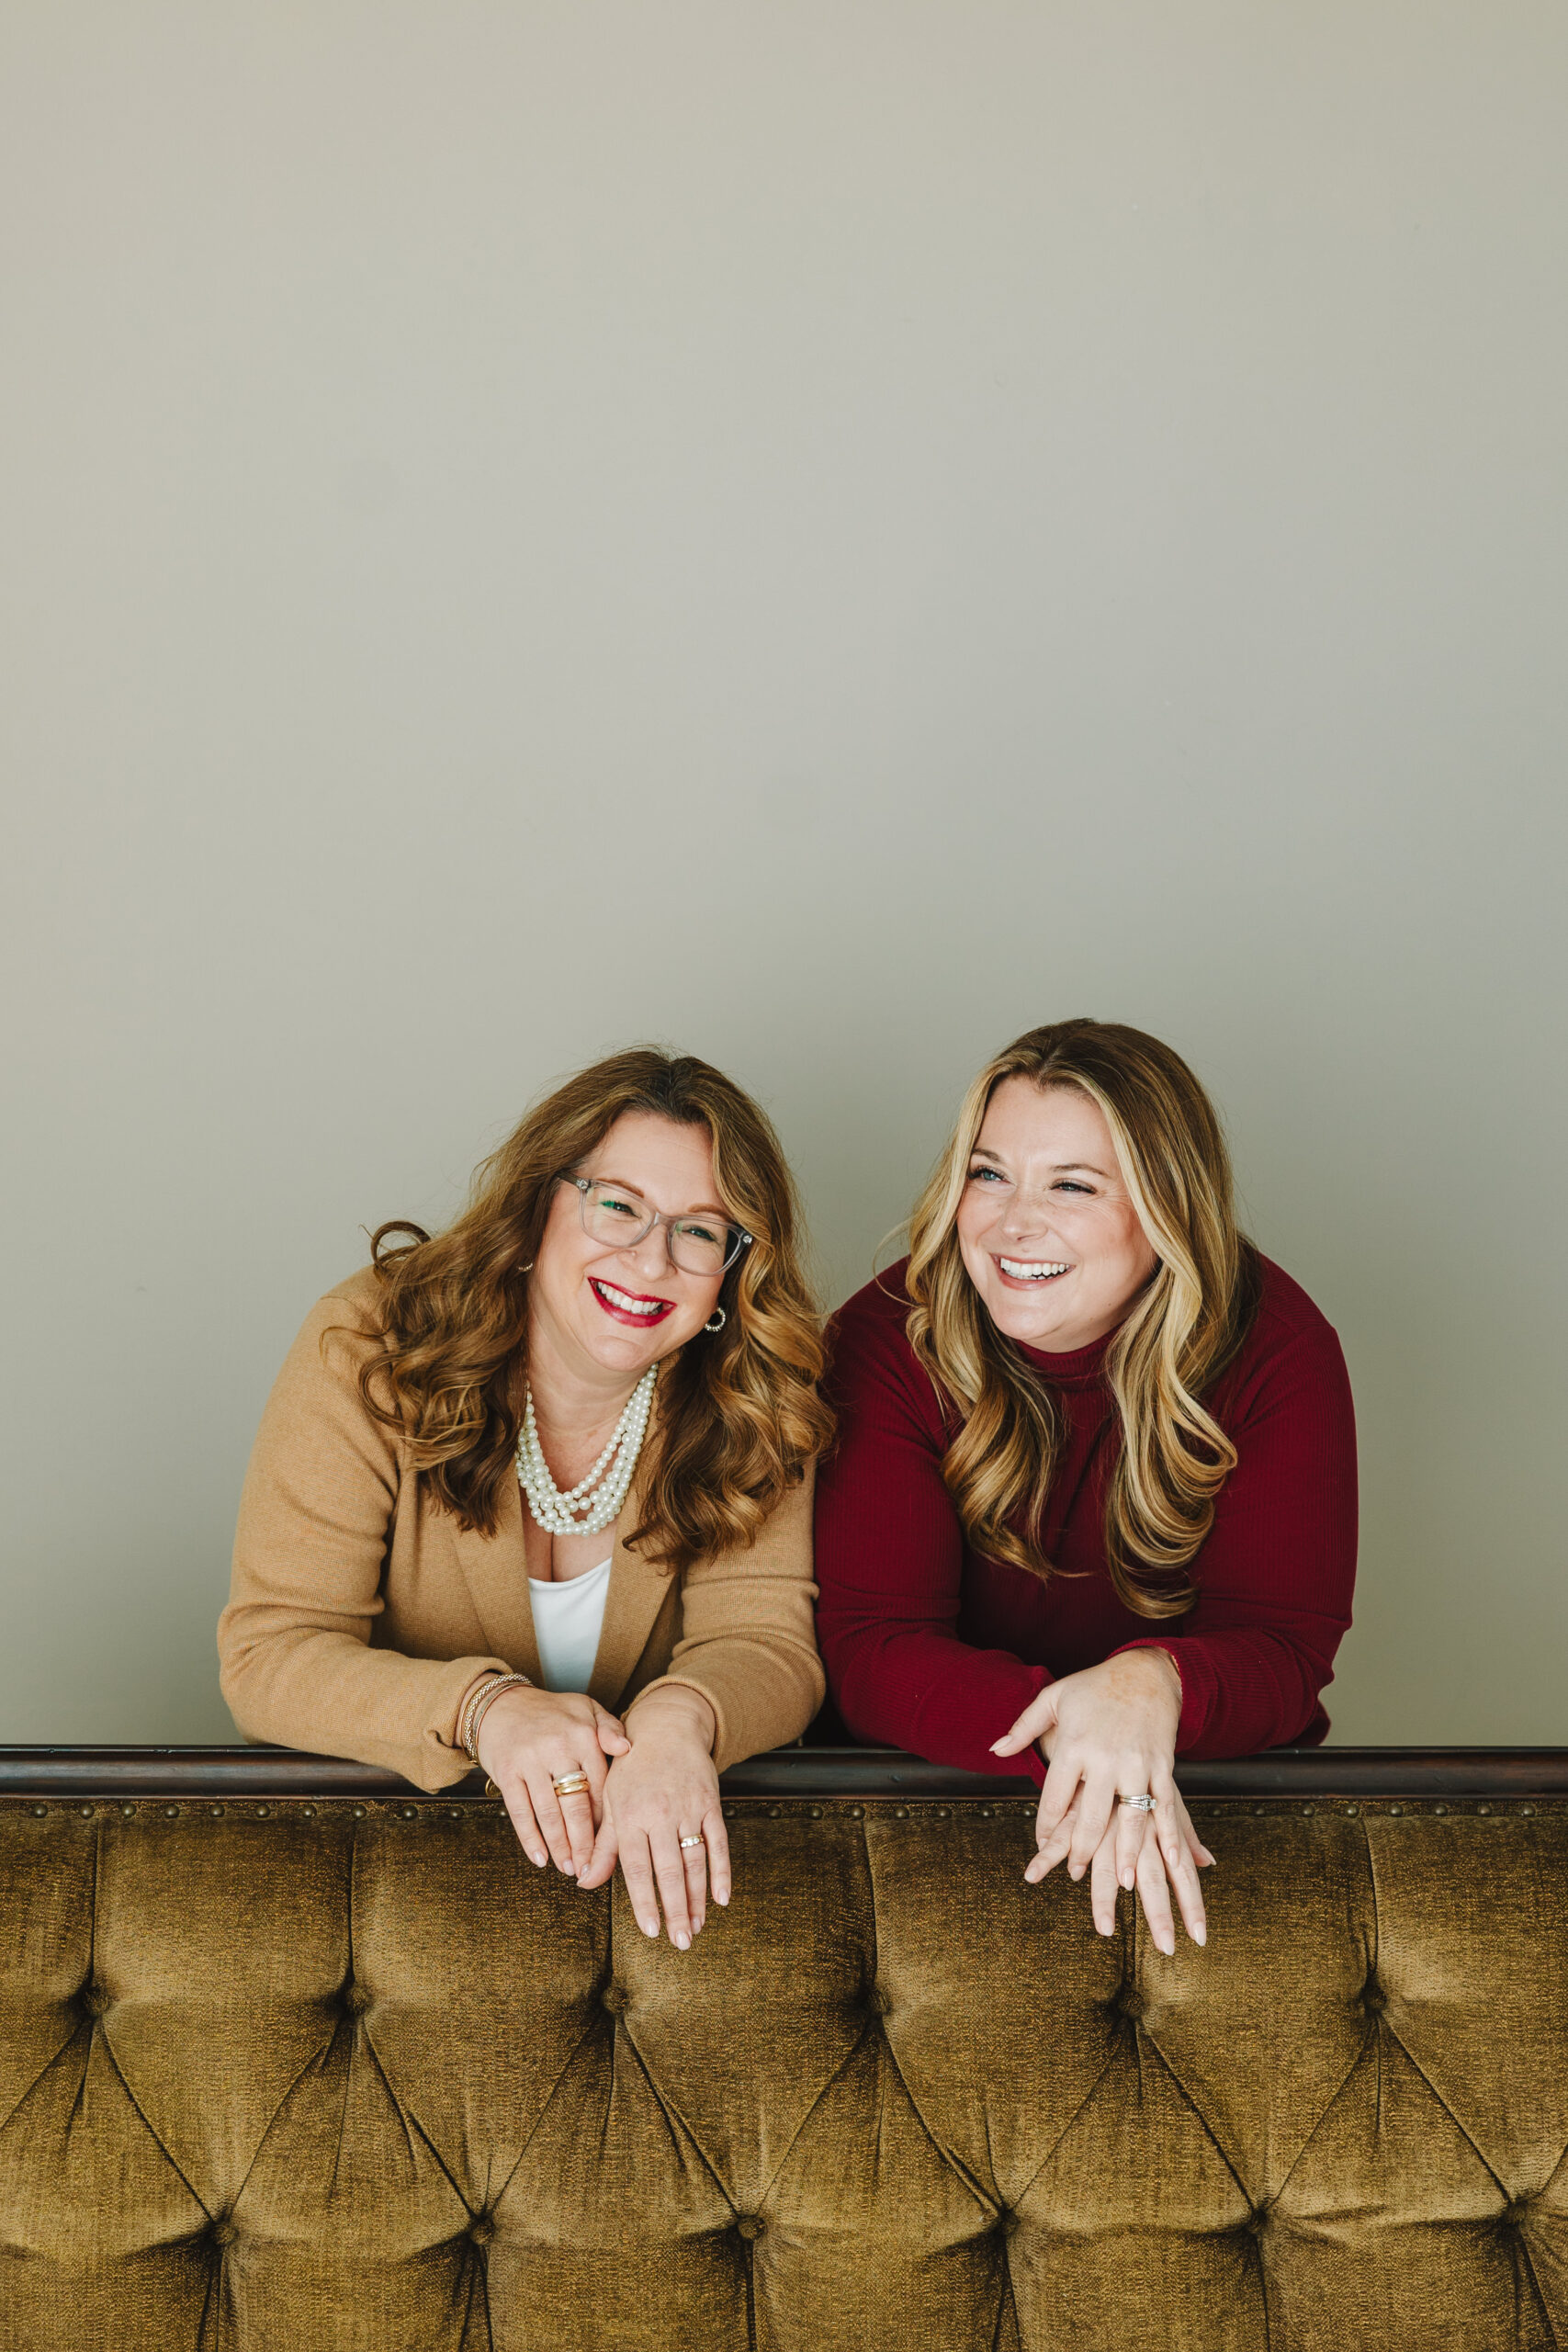 Corry Frazier and Melissa Pepin, founders of The Business Reboot